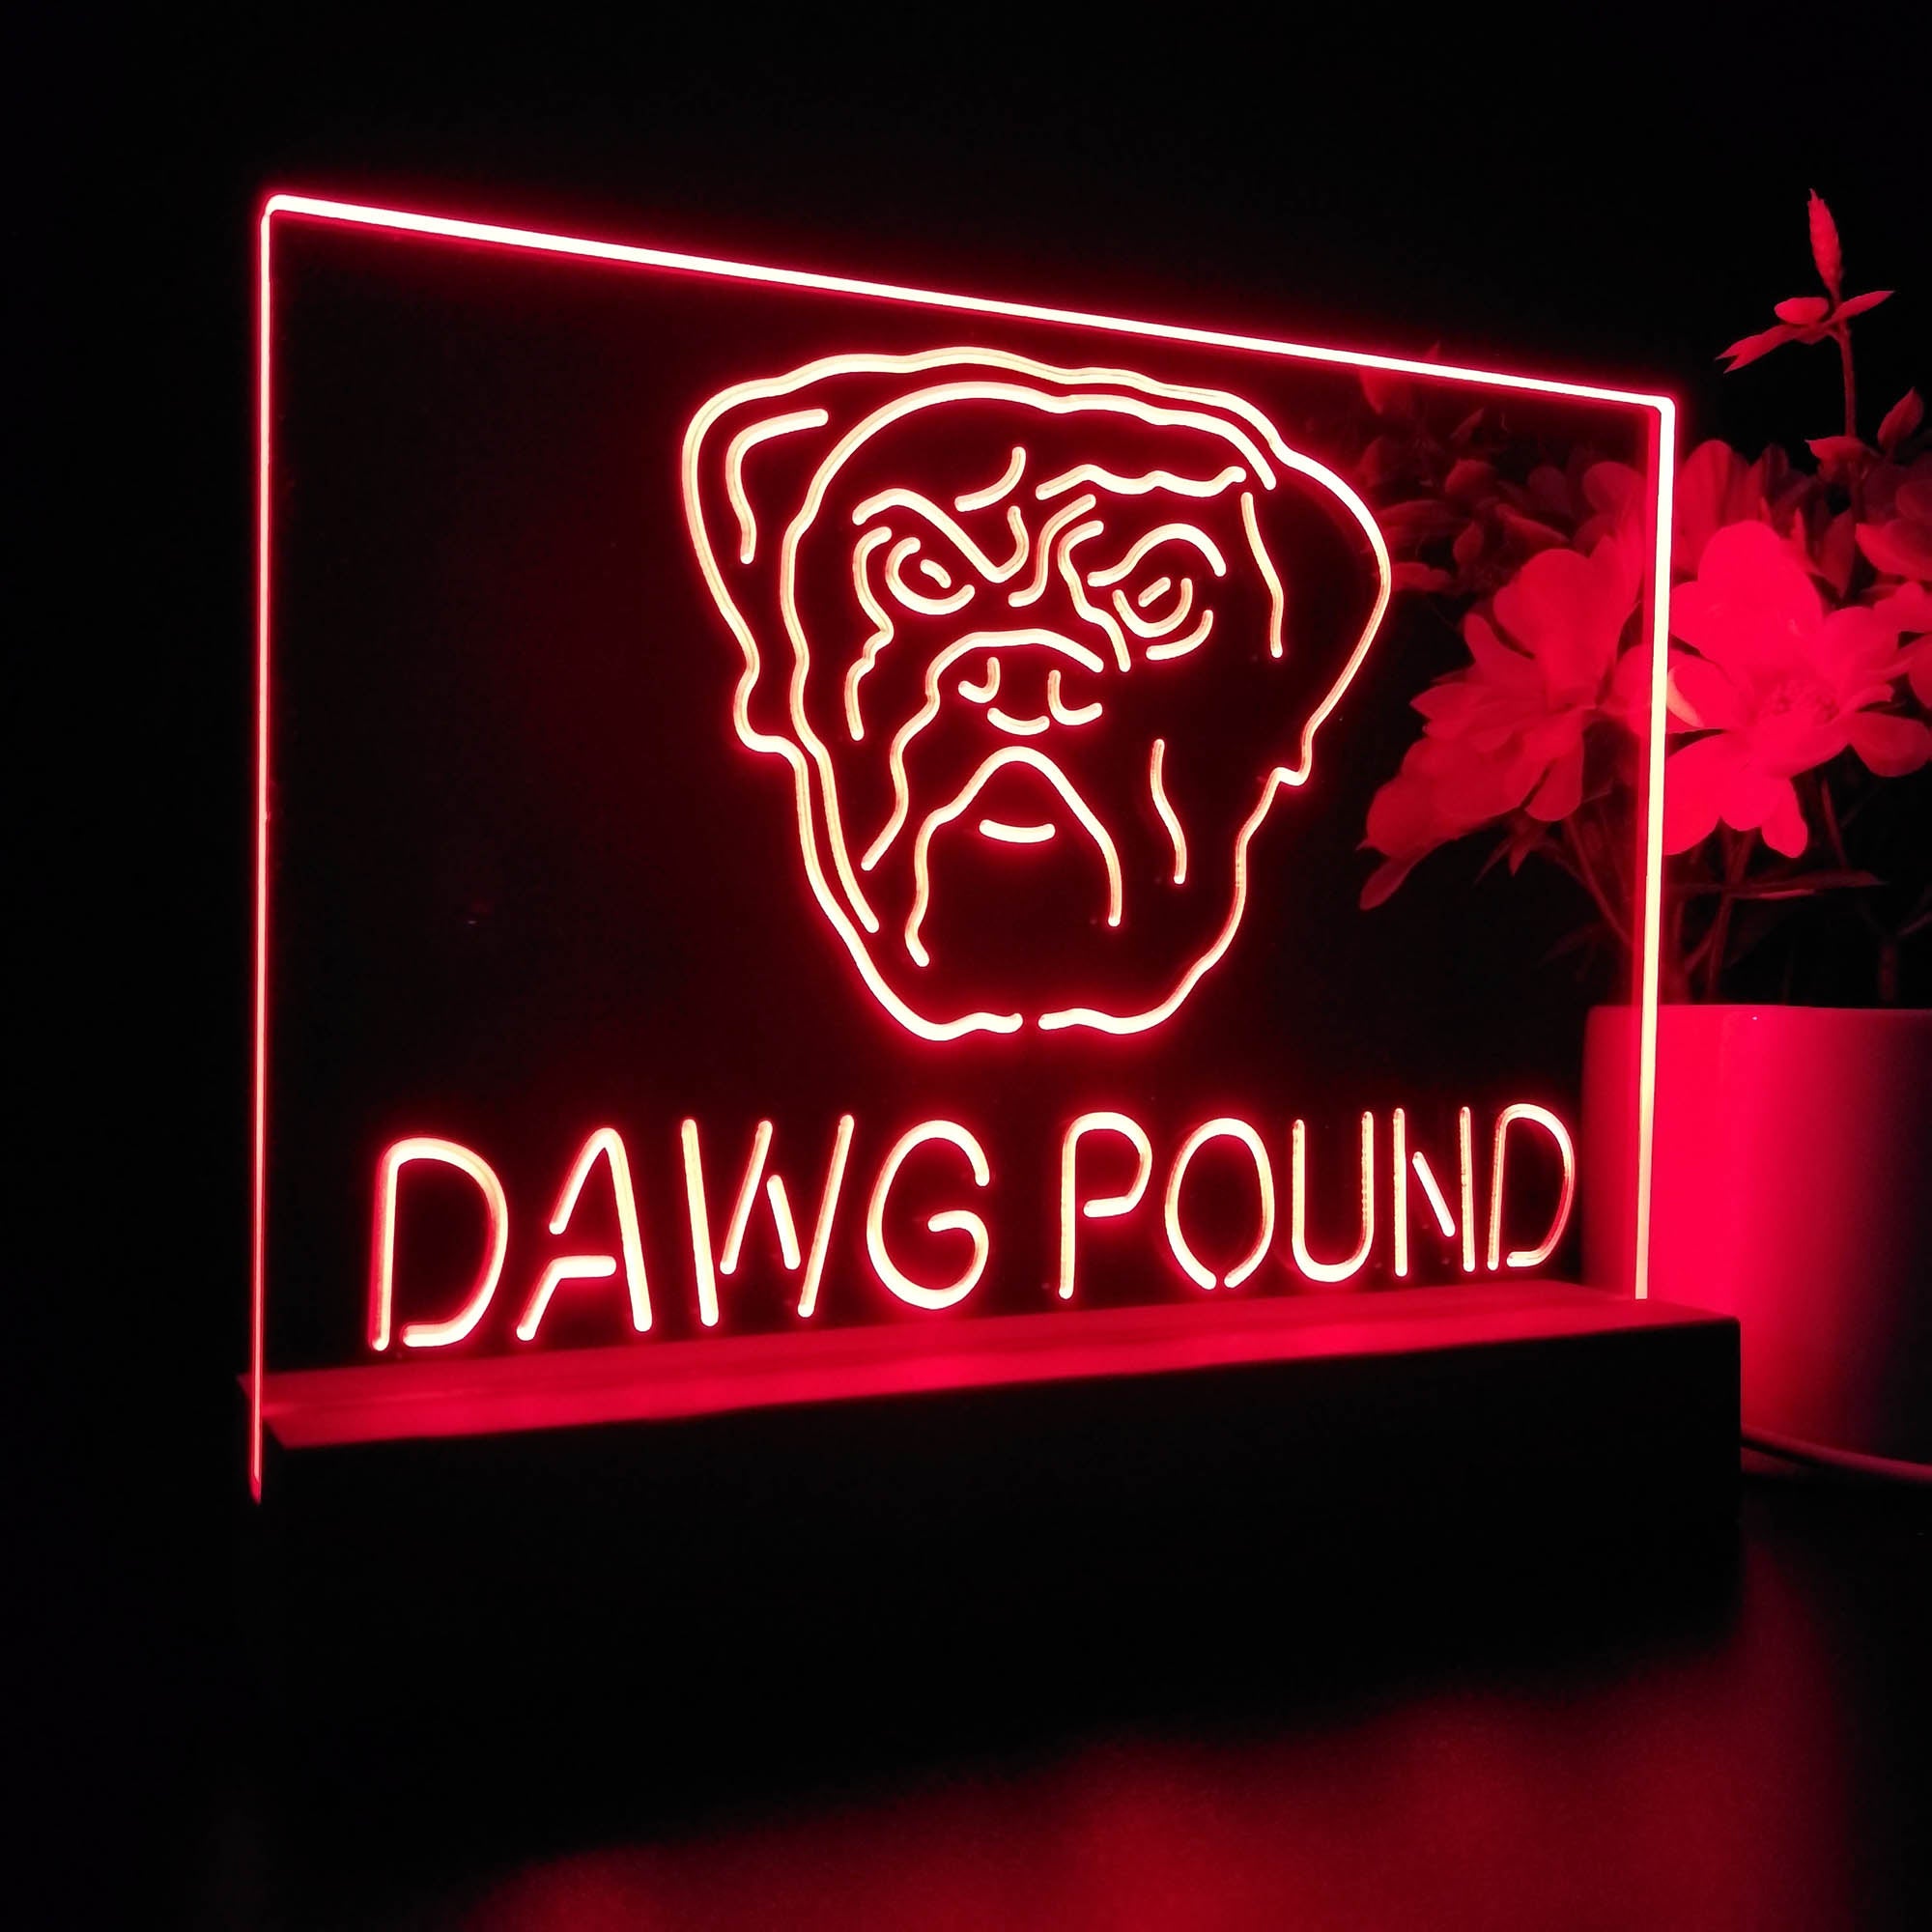 Dawg Pound Cleveland Sport Team Night Lamp 3D Illusion Lamp